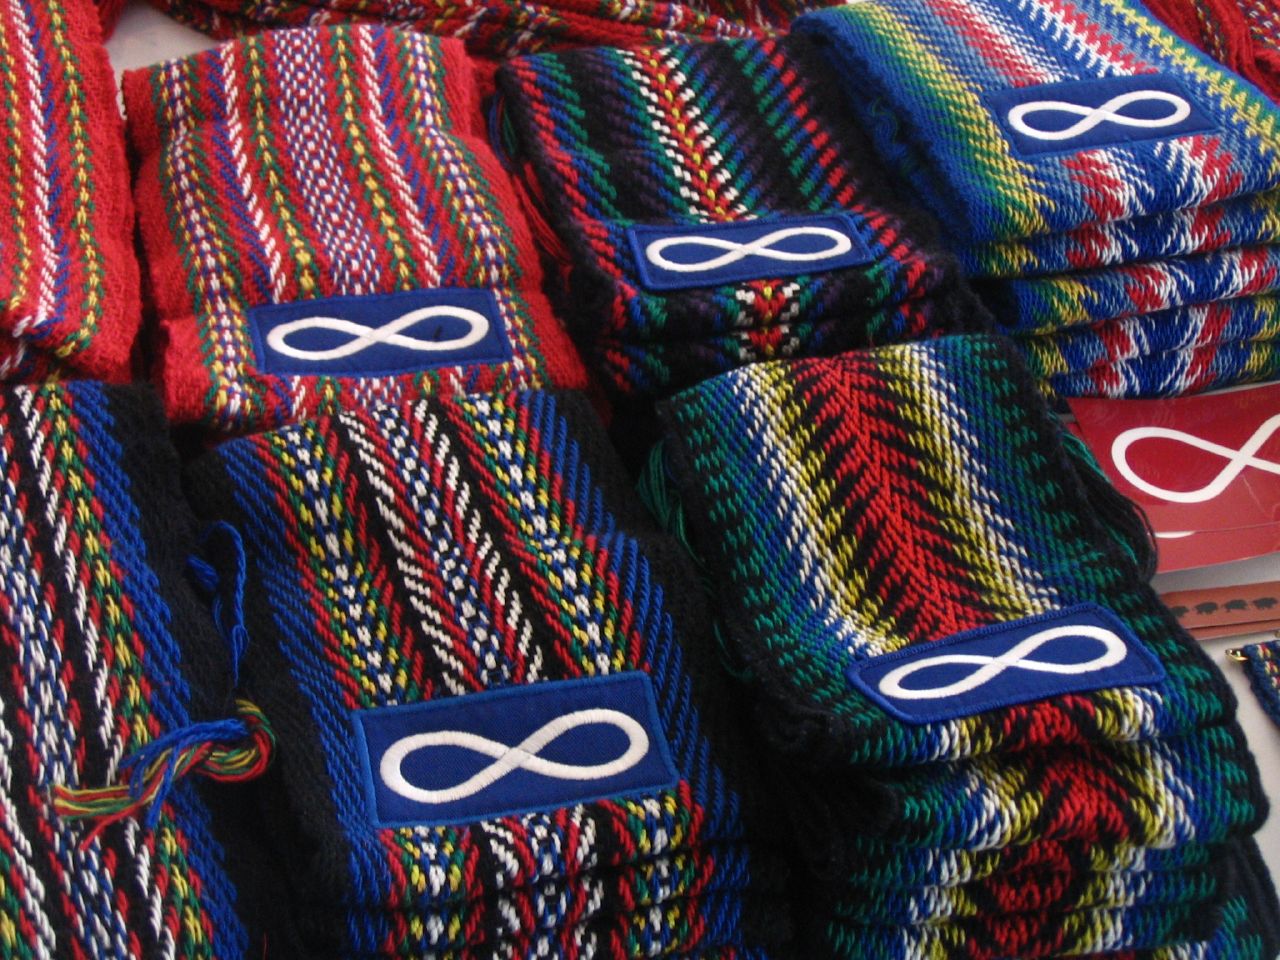 Métis Sashes. These bright finger-woven sashes are worn either around the waist or over the shoulder. The complex patterns represent the complex history of the Métis. Photo by: Chris Corrigan